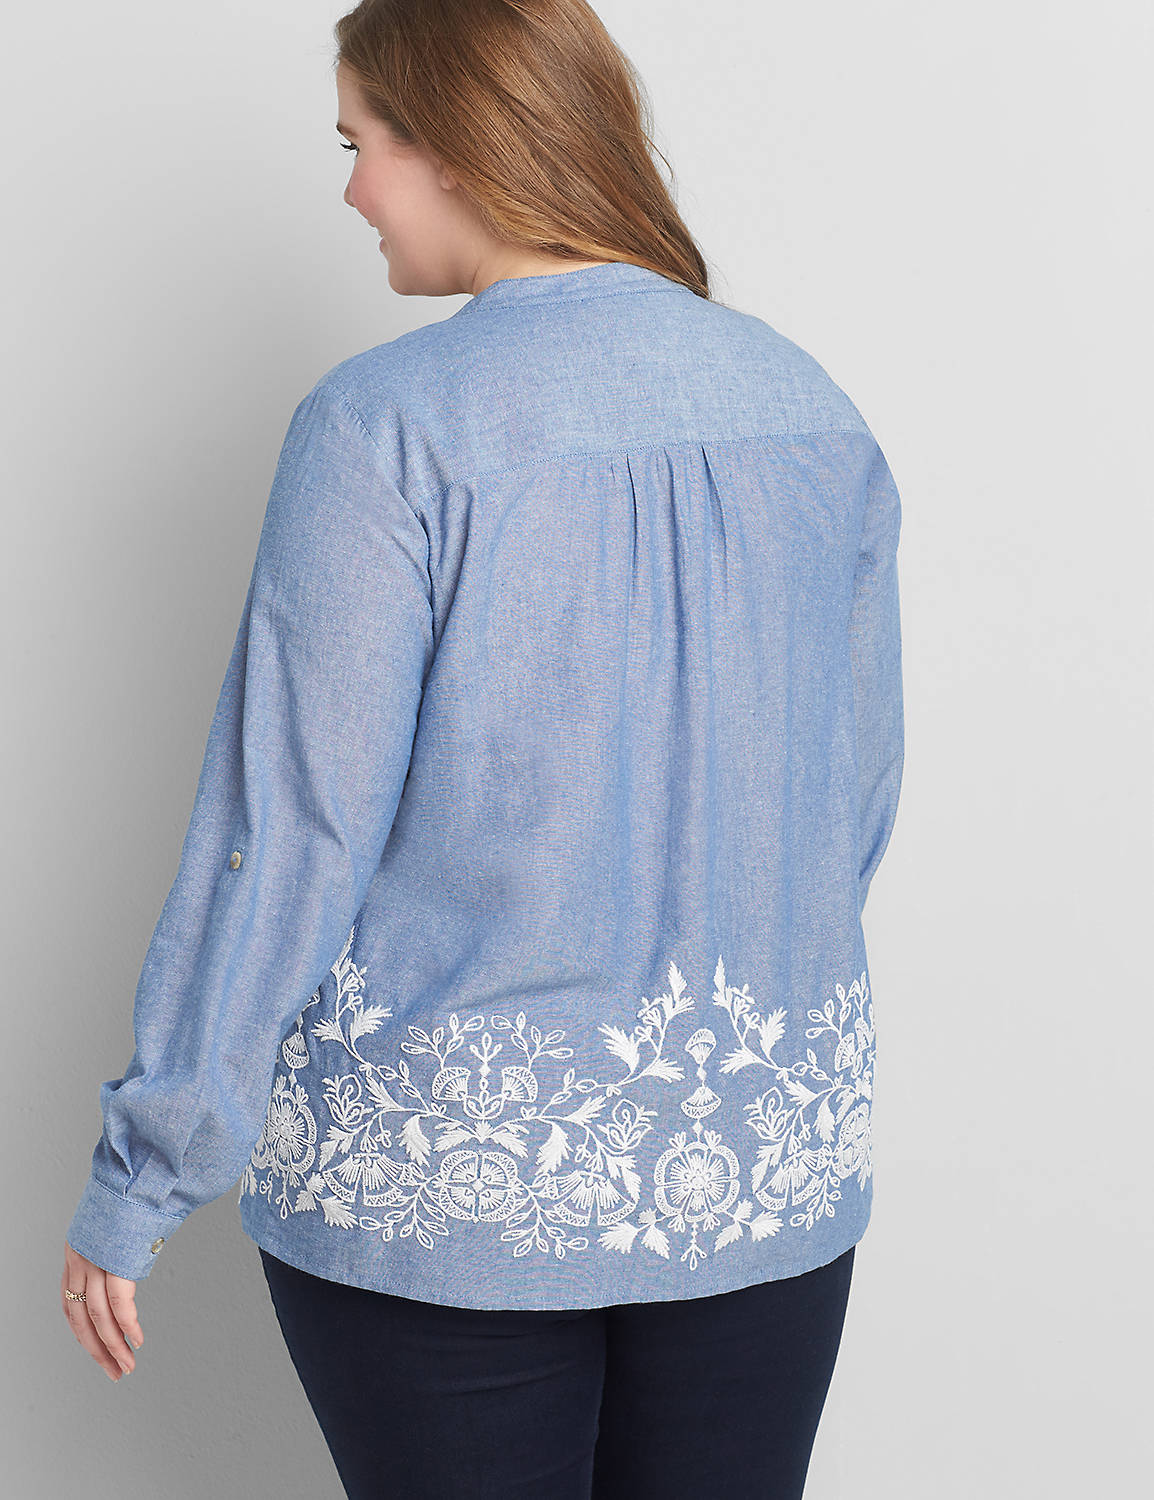 Long Sleeve Split Neck Button Front Embroidery Detail Blouse 1119390:Chambray:26/28 Product Image 2